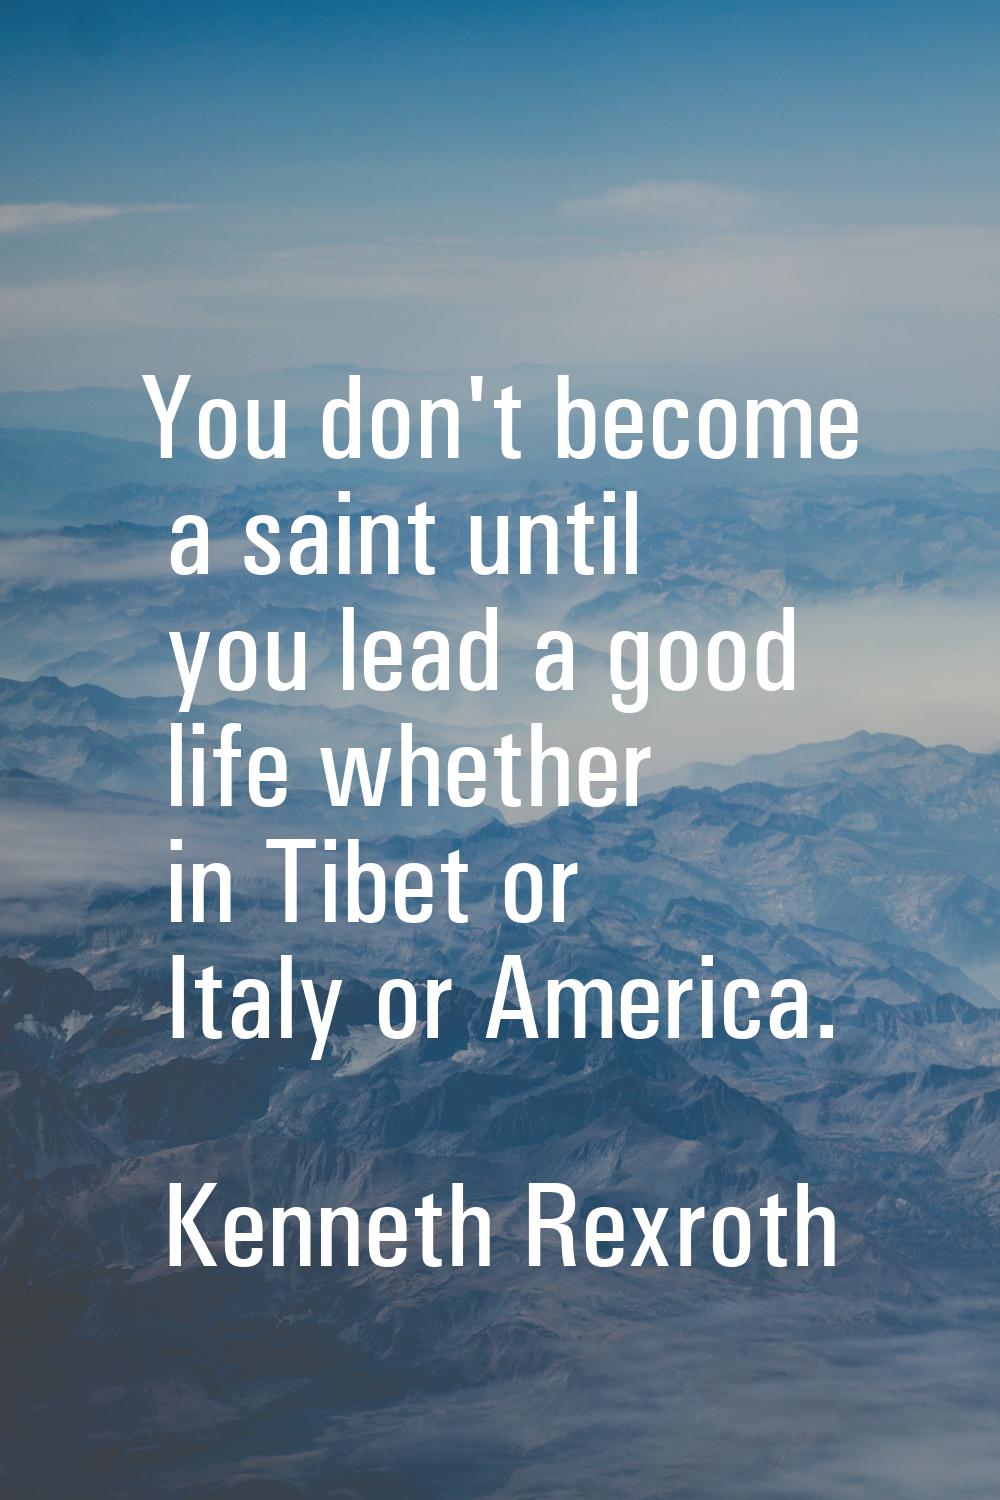 You don't become a saint until you lead a good life whether in Tibet or Italy or America.